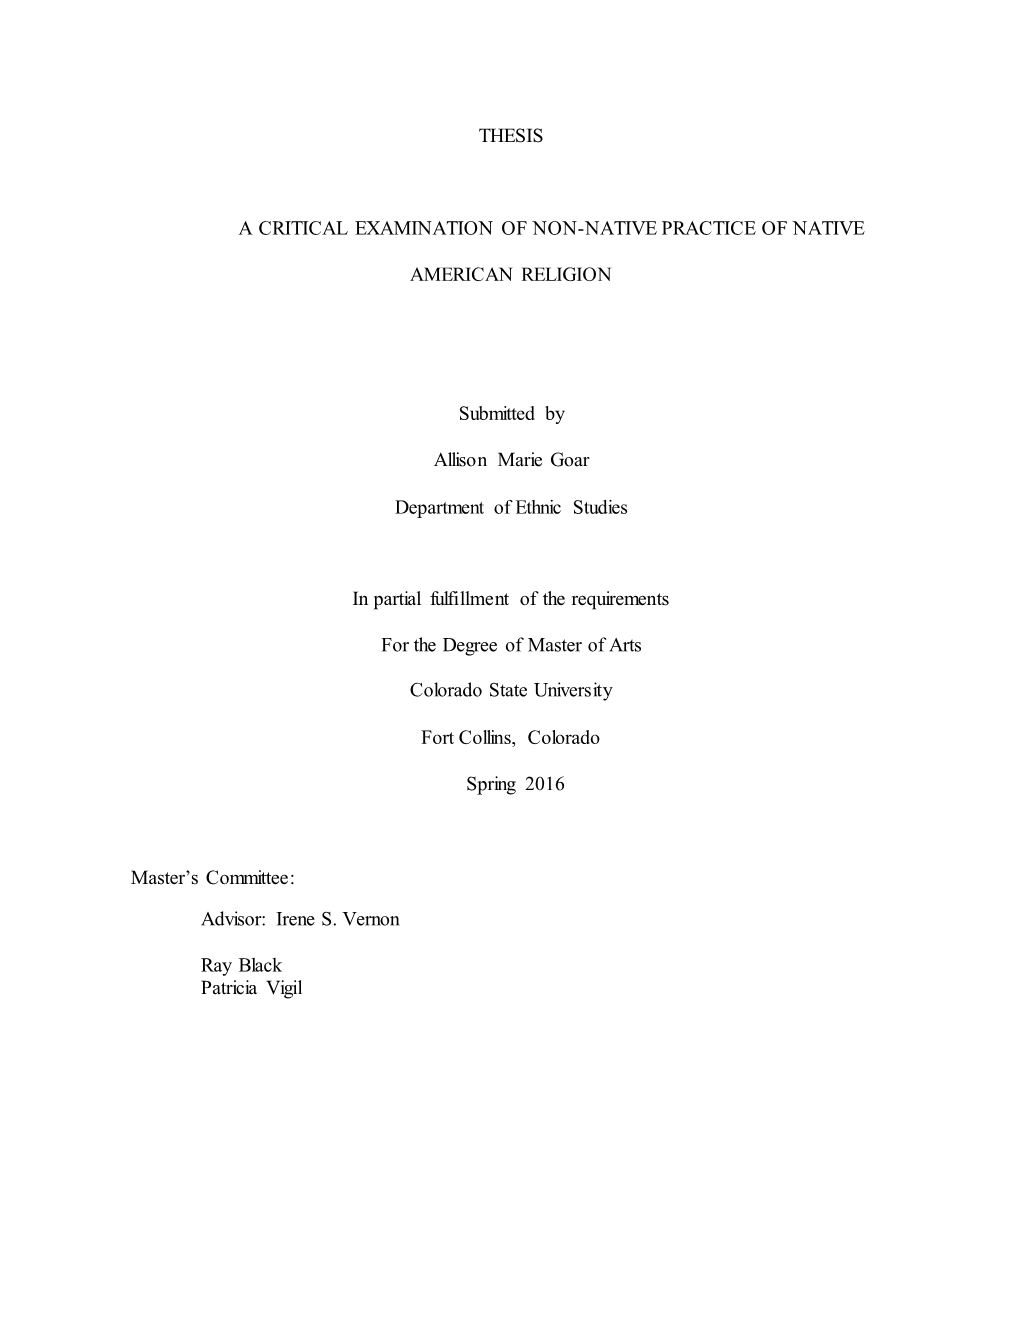 THESIS a CRITICAL EXAMINATION of NON-NATIVE PRACTICE of NATIVE AMERICAN RELIGION Submitted by Allison Marie Goar Department of E